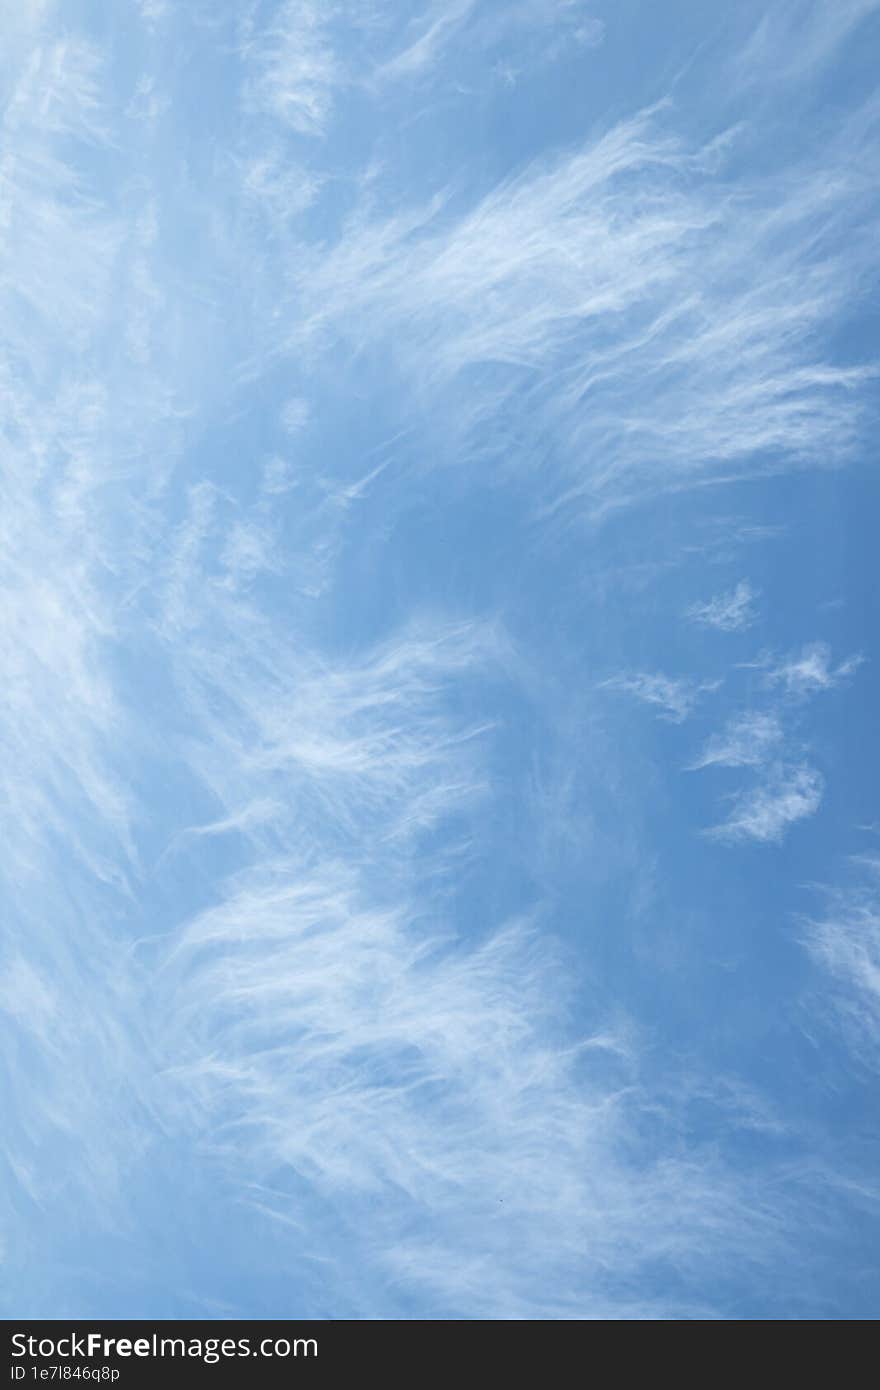 Wispy and transparent clouds. Vertical background with high gentle clouds.